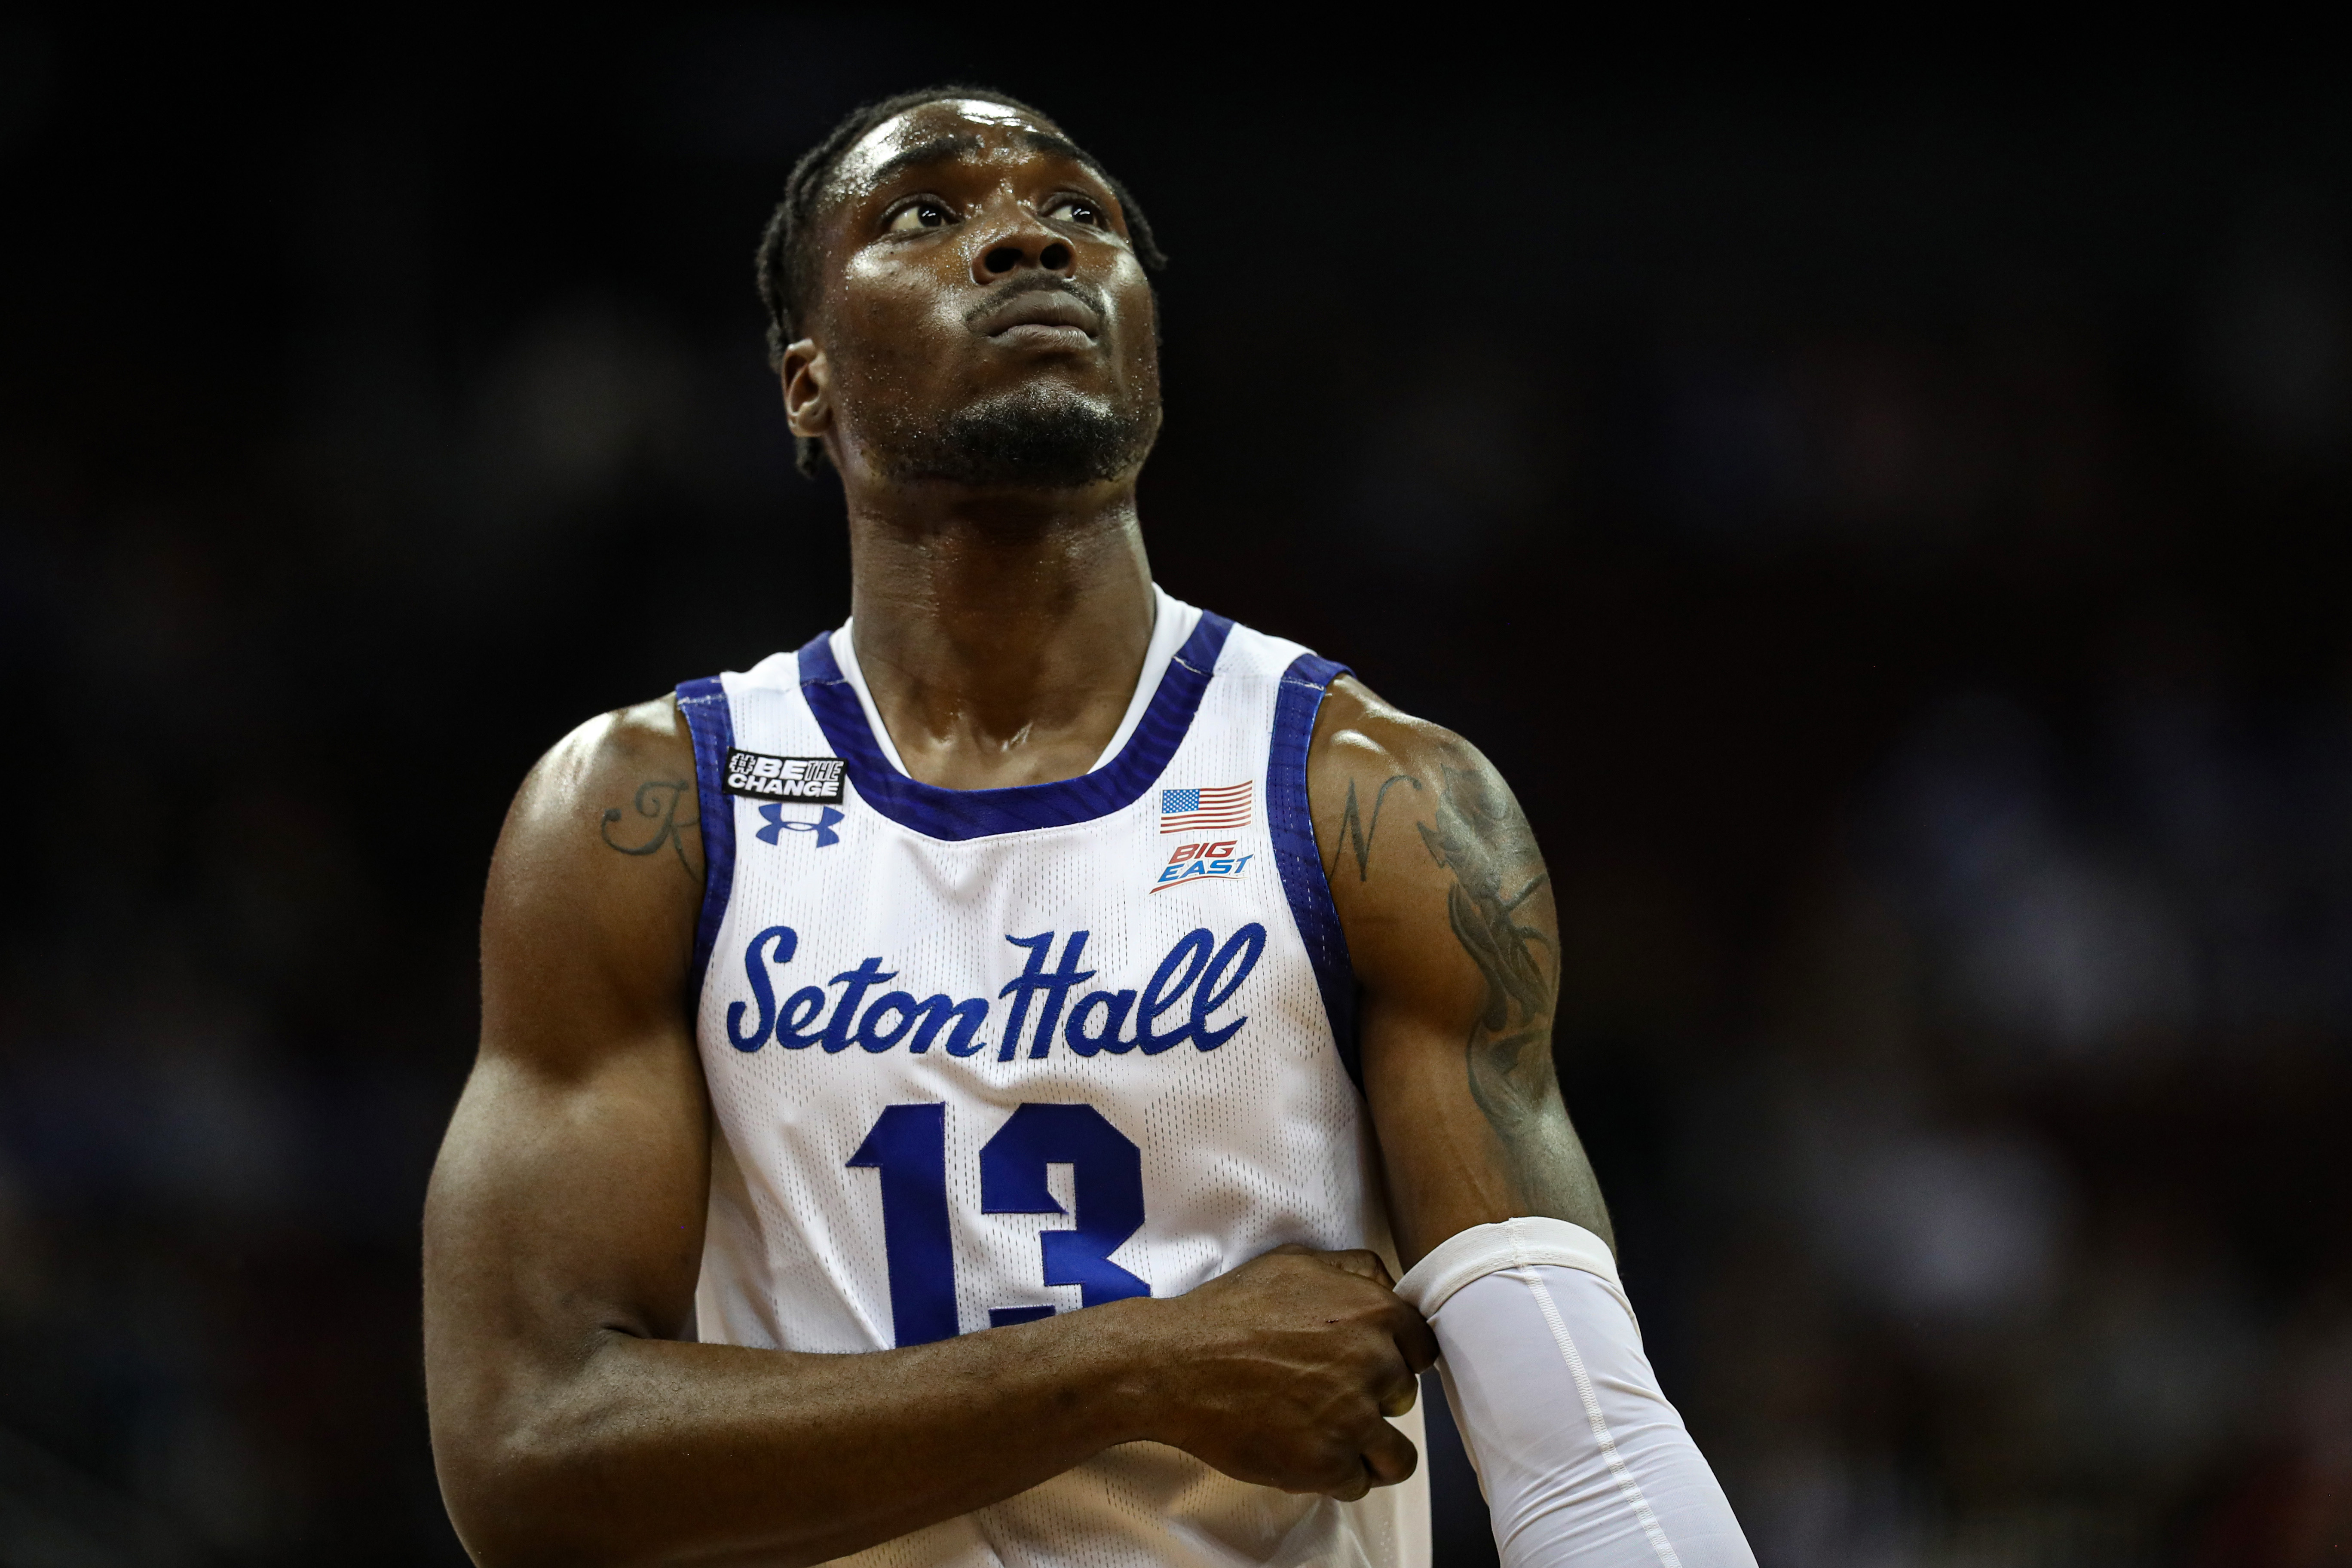 Seton Hall dominates in 38-point victory against Wagner